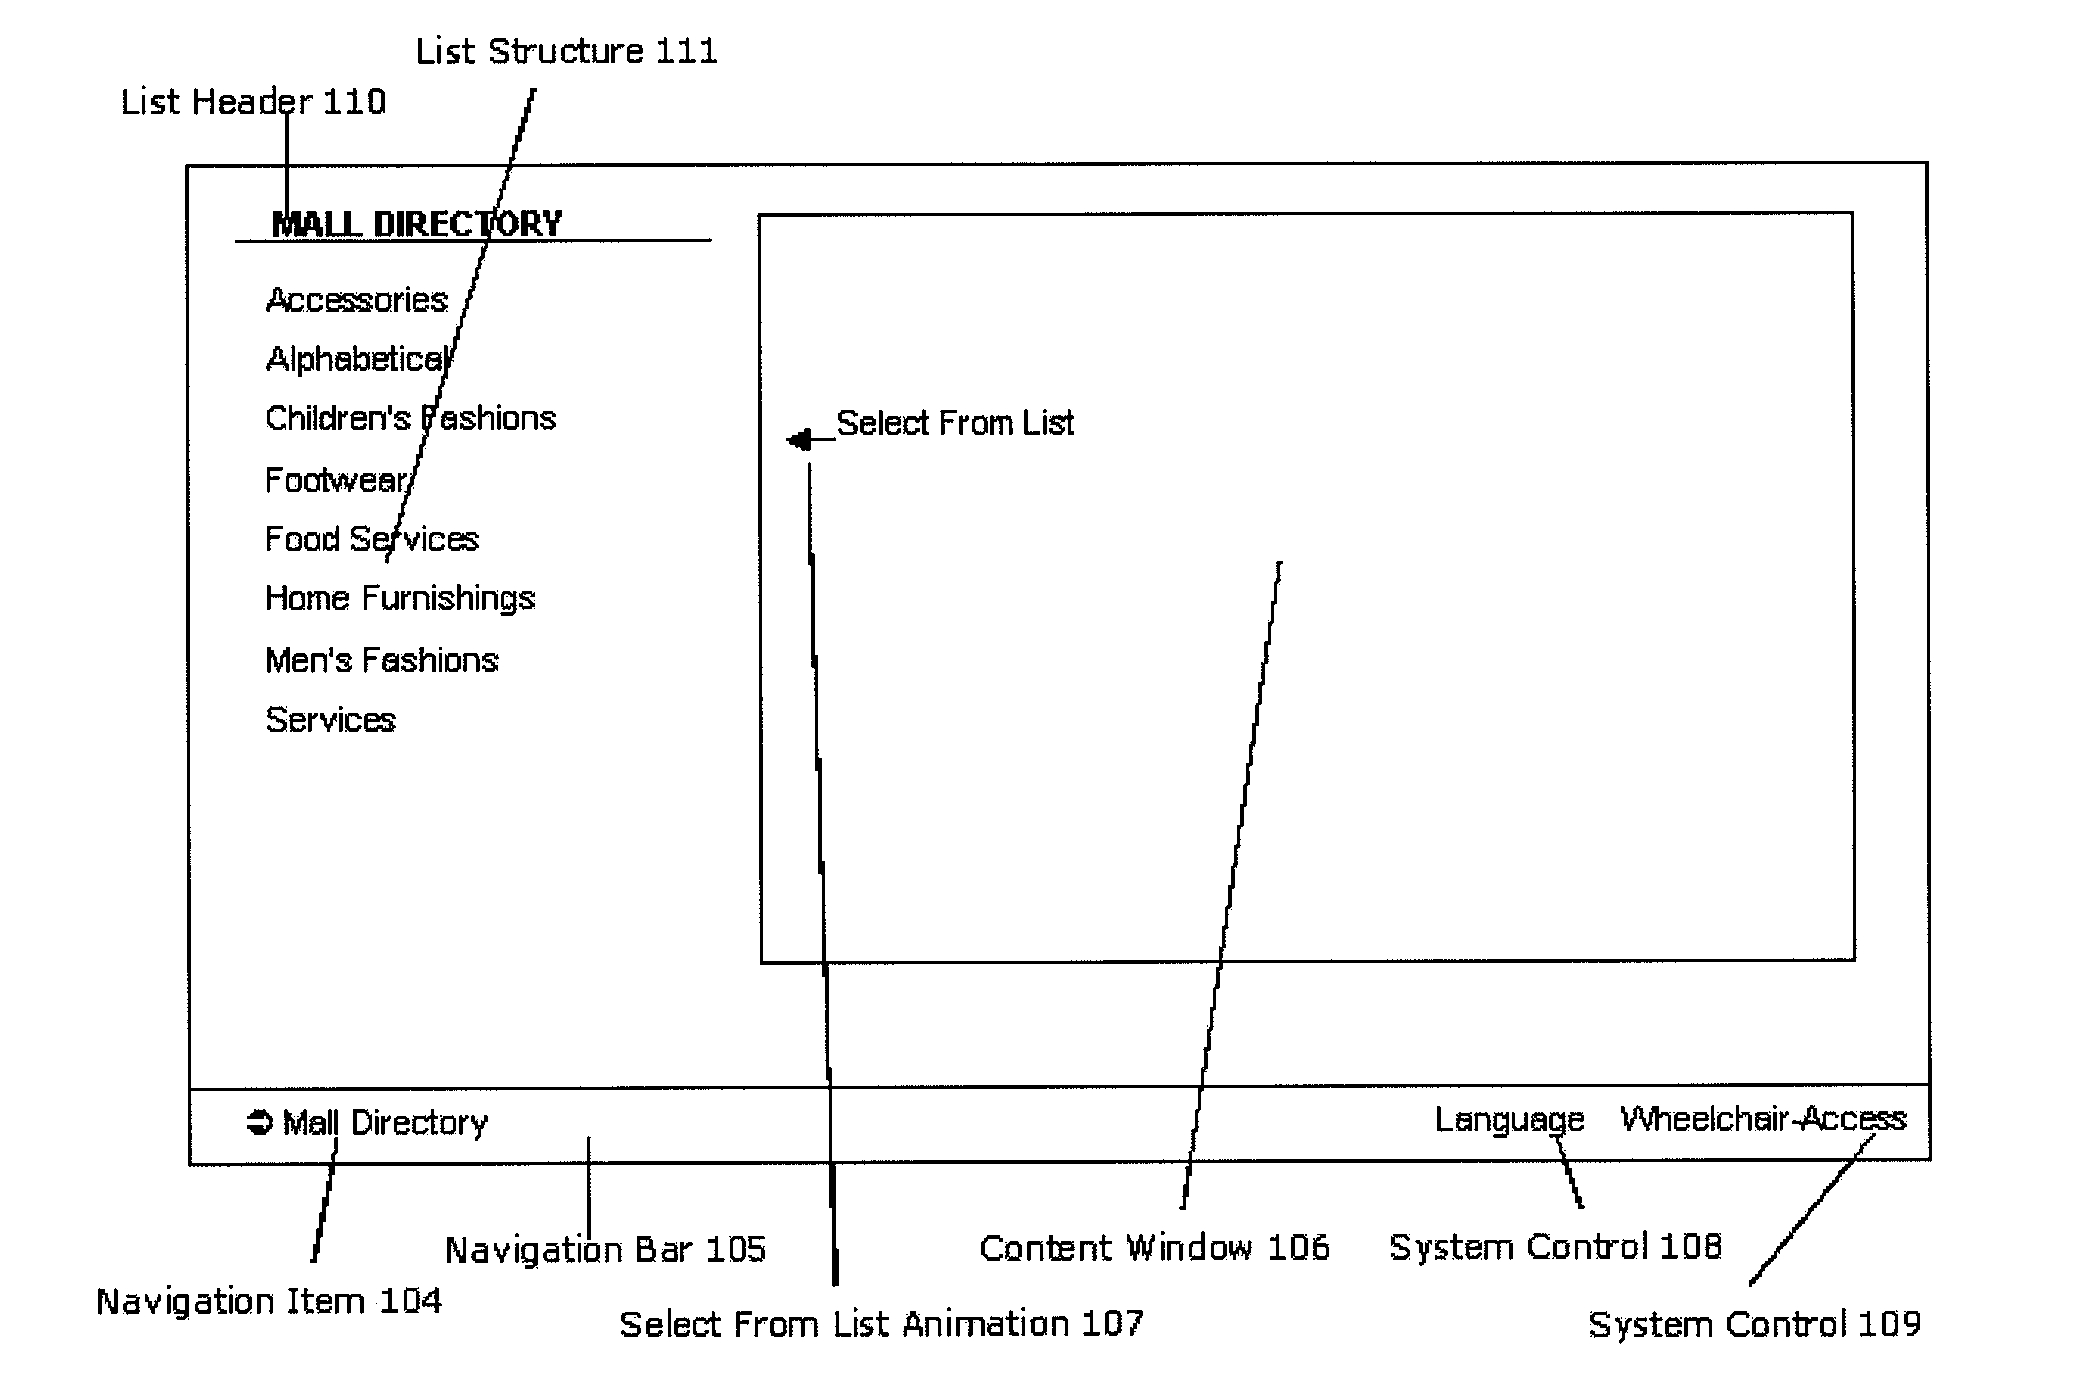 User interface for large-format interactive display systems